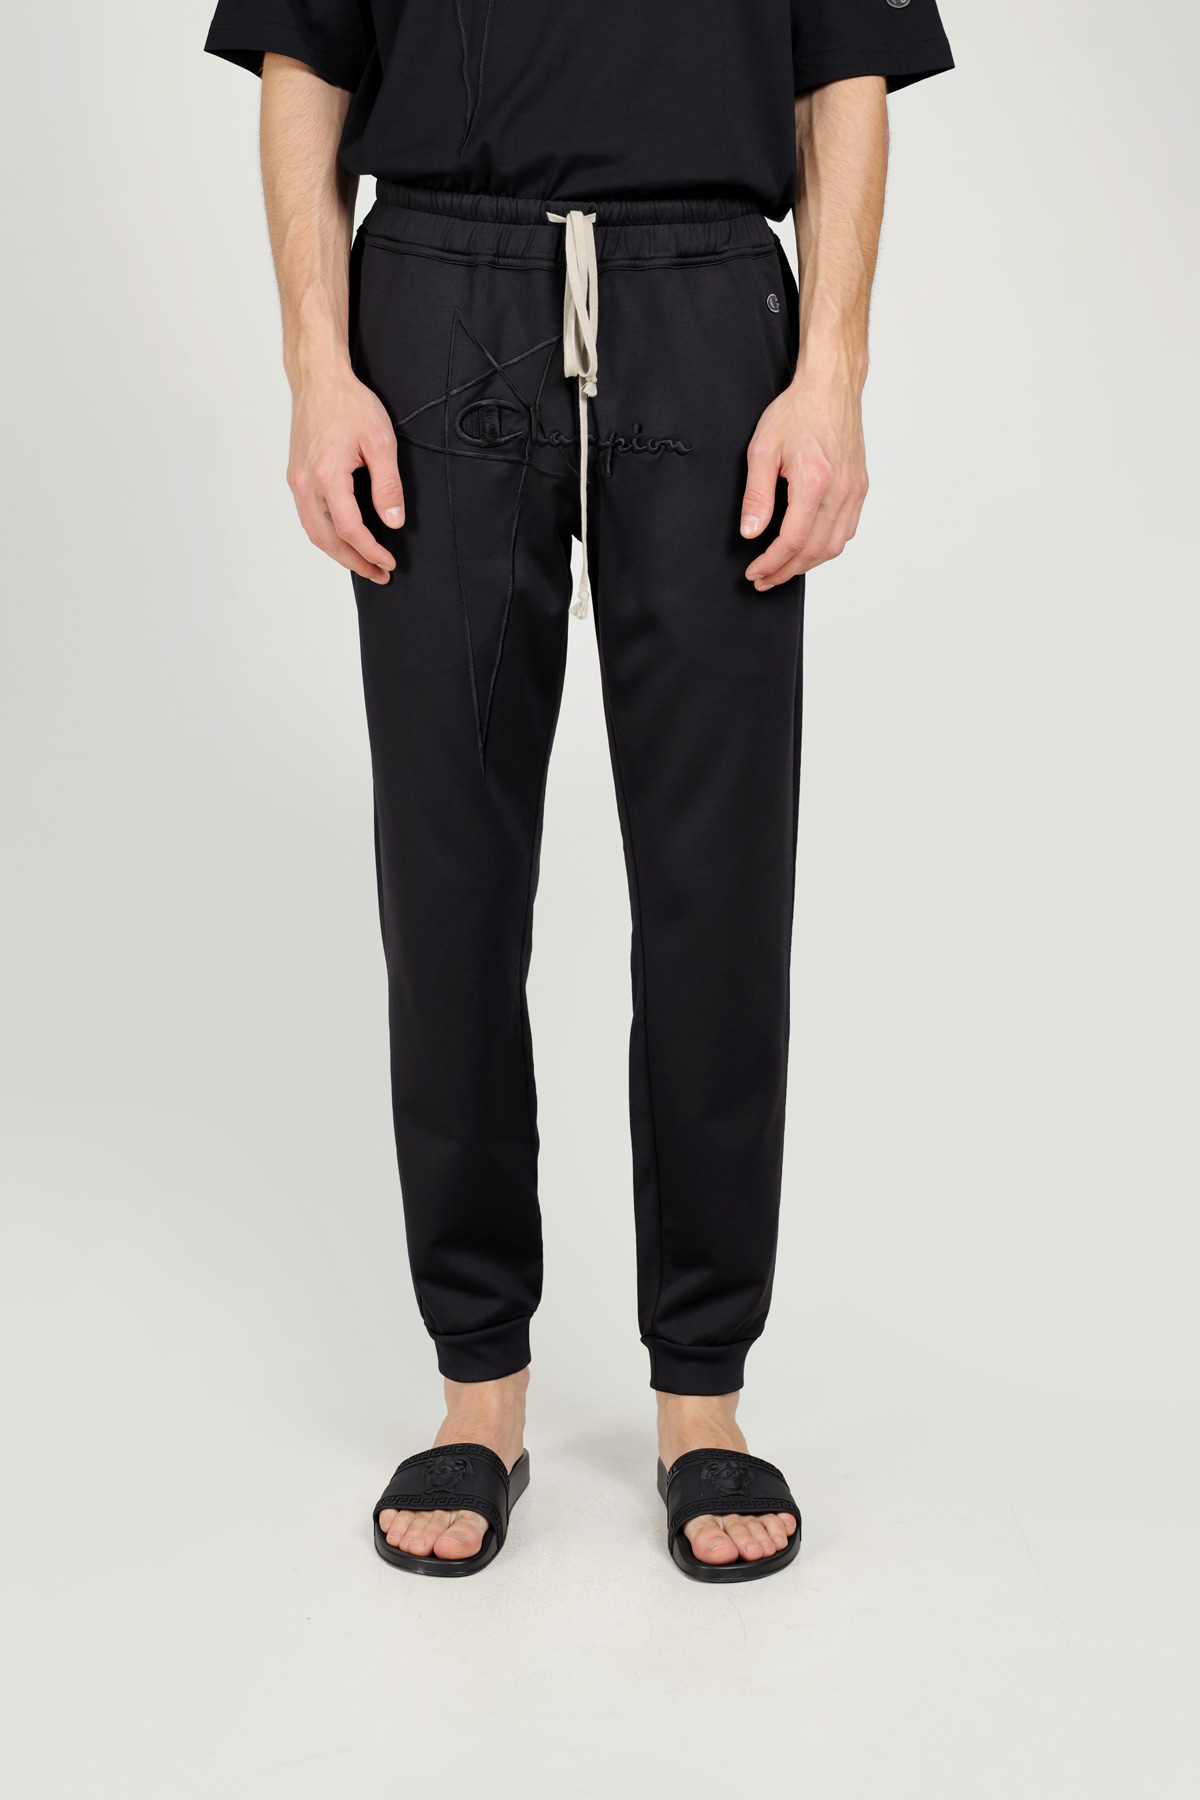 RICK OWENS x CHAMPION Men Embroidered Logo Trousers in Black 1